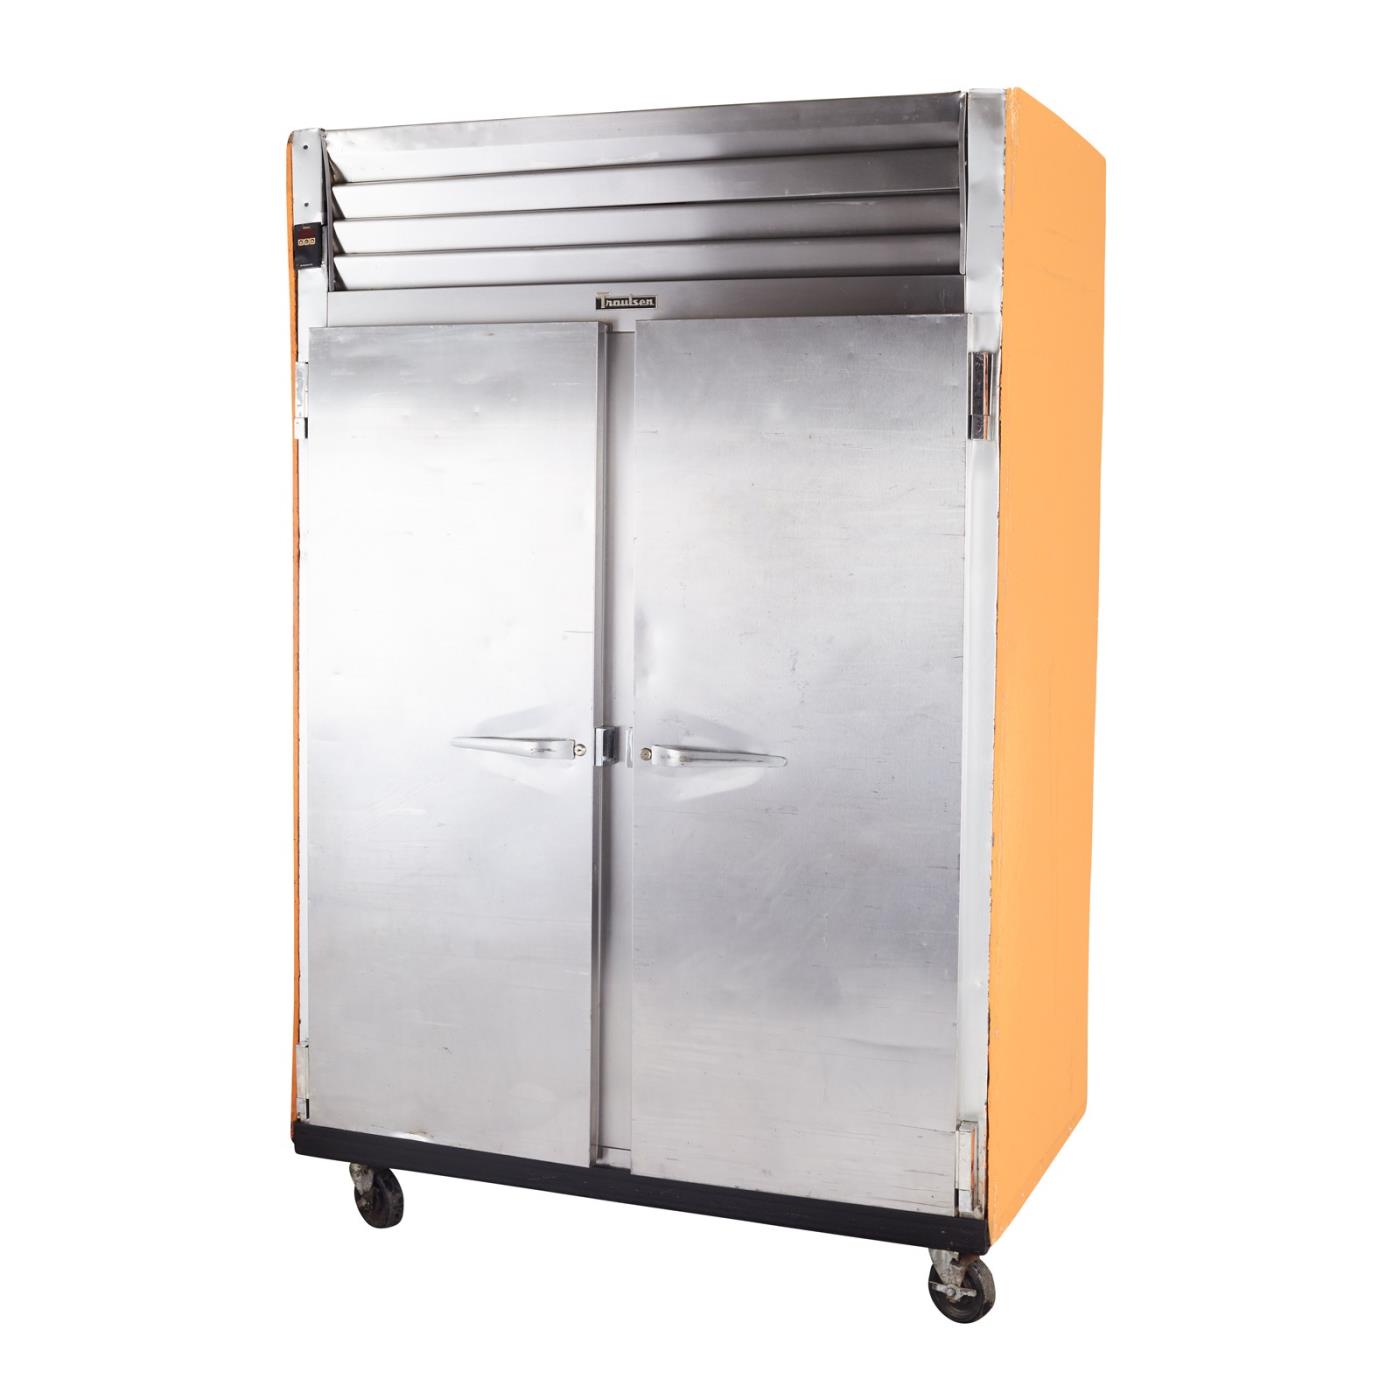 Refrigerators, Freezers and Coolers